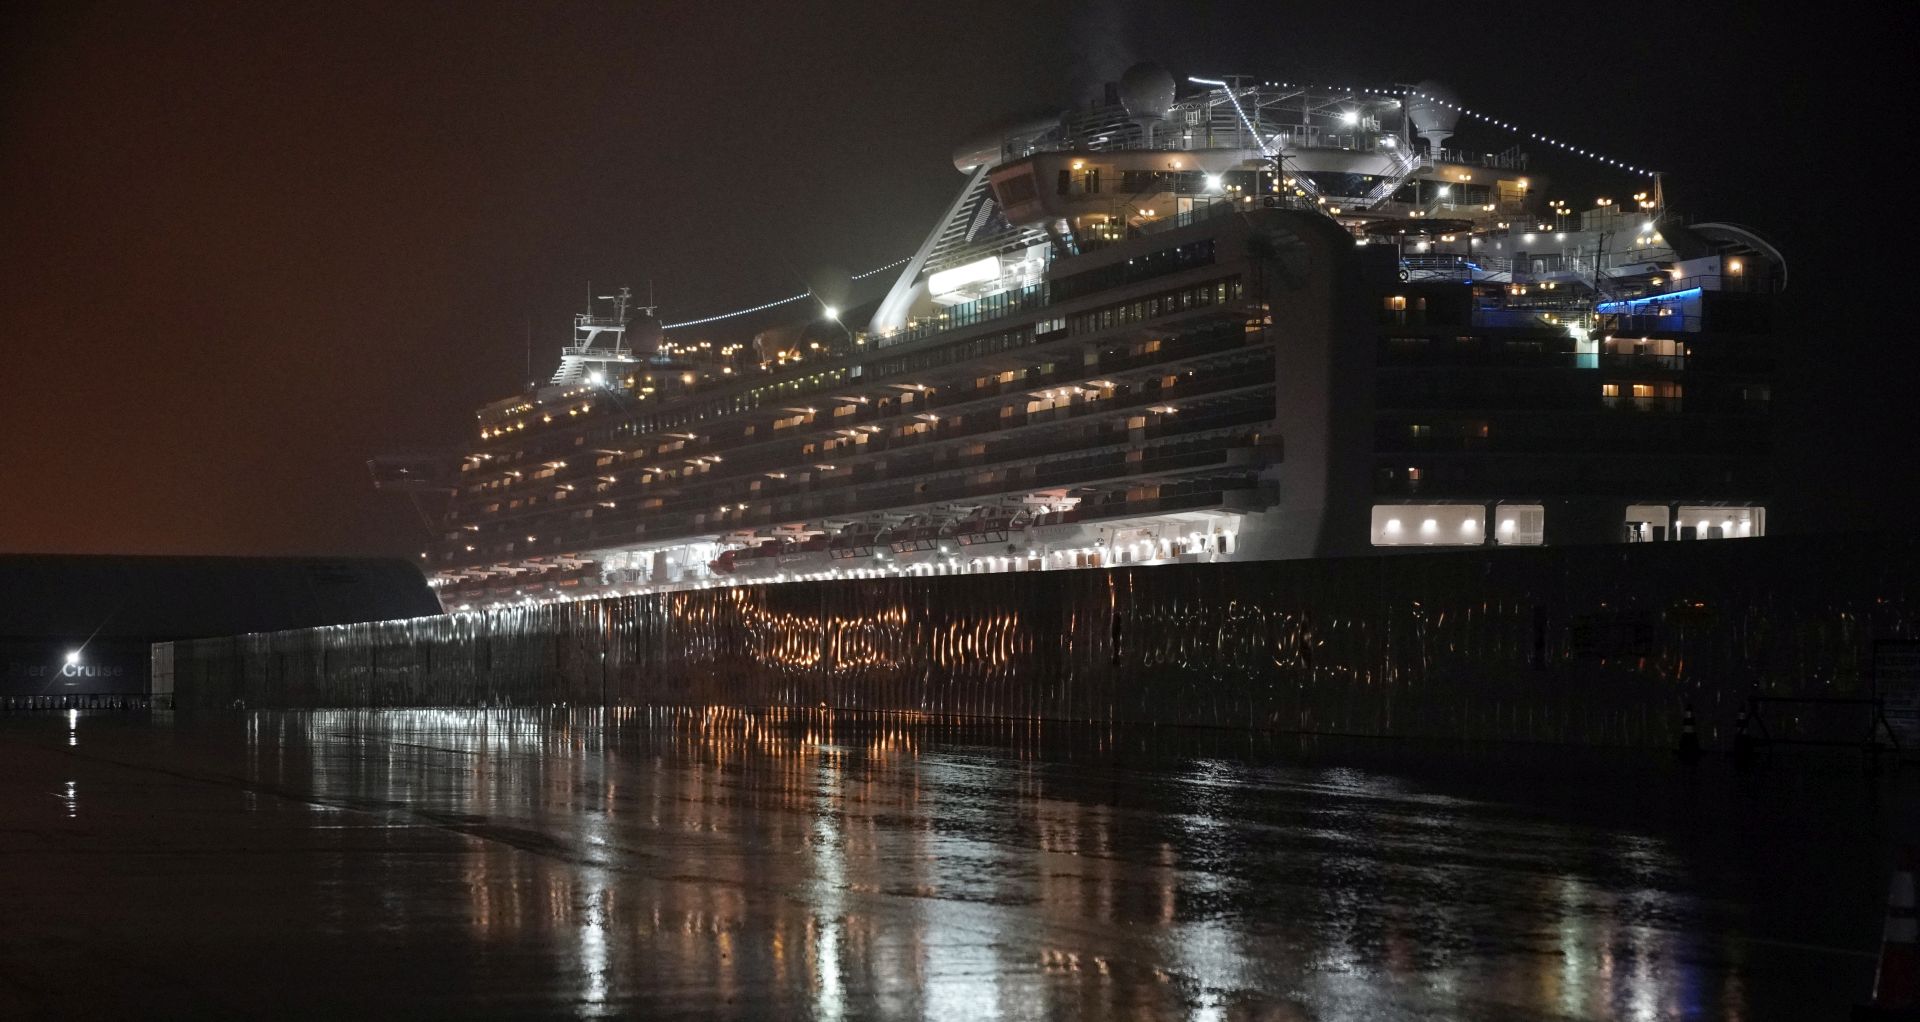 epa08223407 The Diamond Princess cruise ship is seen docked under heavy rain at the Daikoku Pier Cruise Terminal in Yokohama, south of Tokyo, Japan, 16 February 2020 (issued 17 February 2020). According to latest media reports on 17 February, another 99 passengers of the Diamond Princess cruise ship have been tested positive for the Covid-19 coronavirus, rising the total number of infections to 454 in the vessel.  EPA/FRANCK ROBICHON